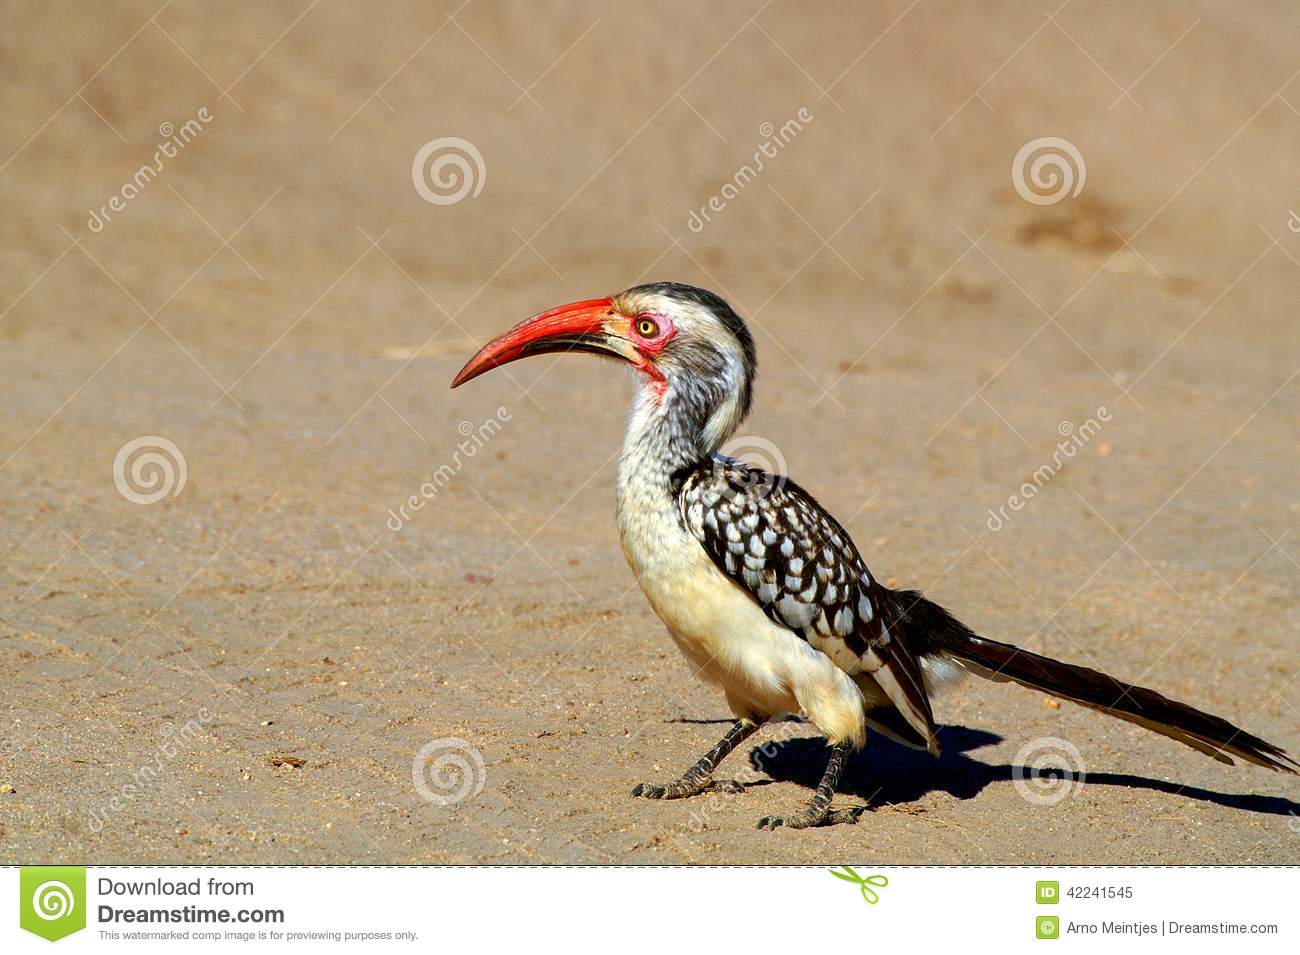 Red-billed Hornbill clipart #3, Download drawings